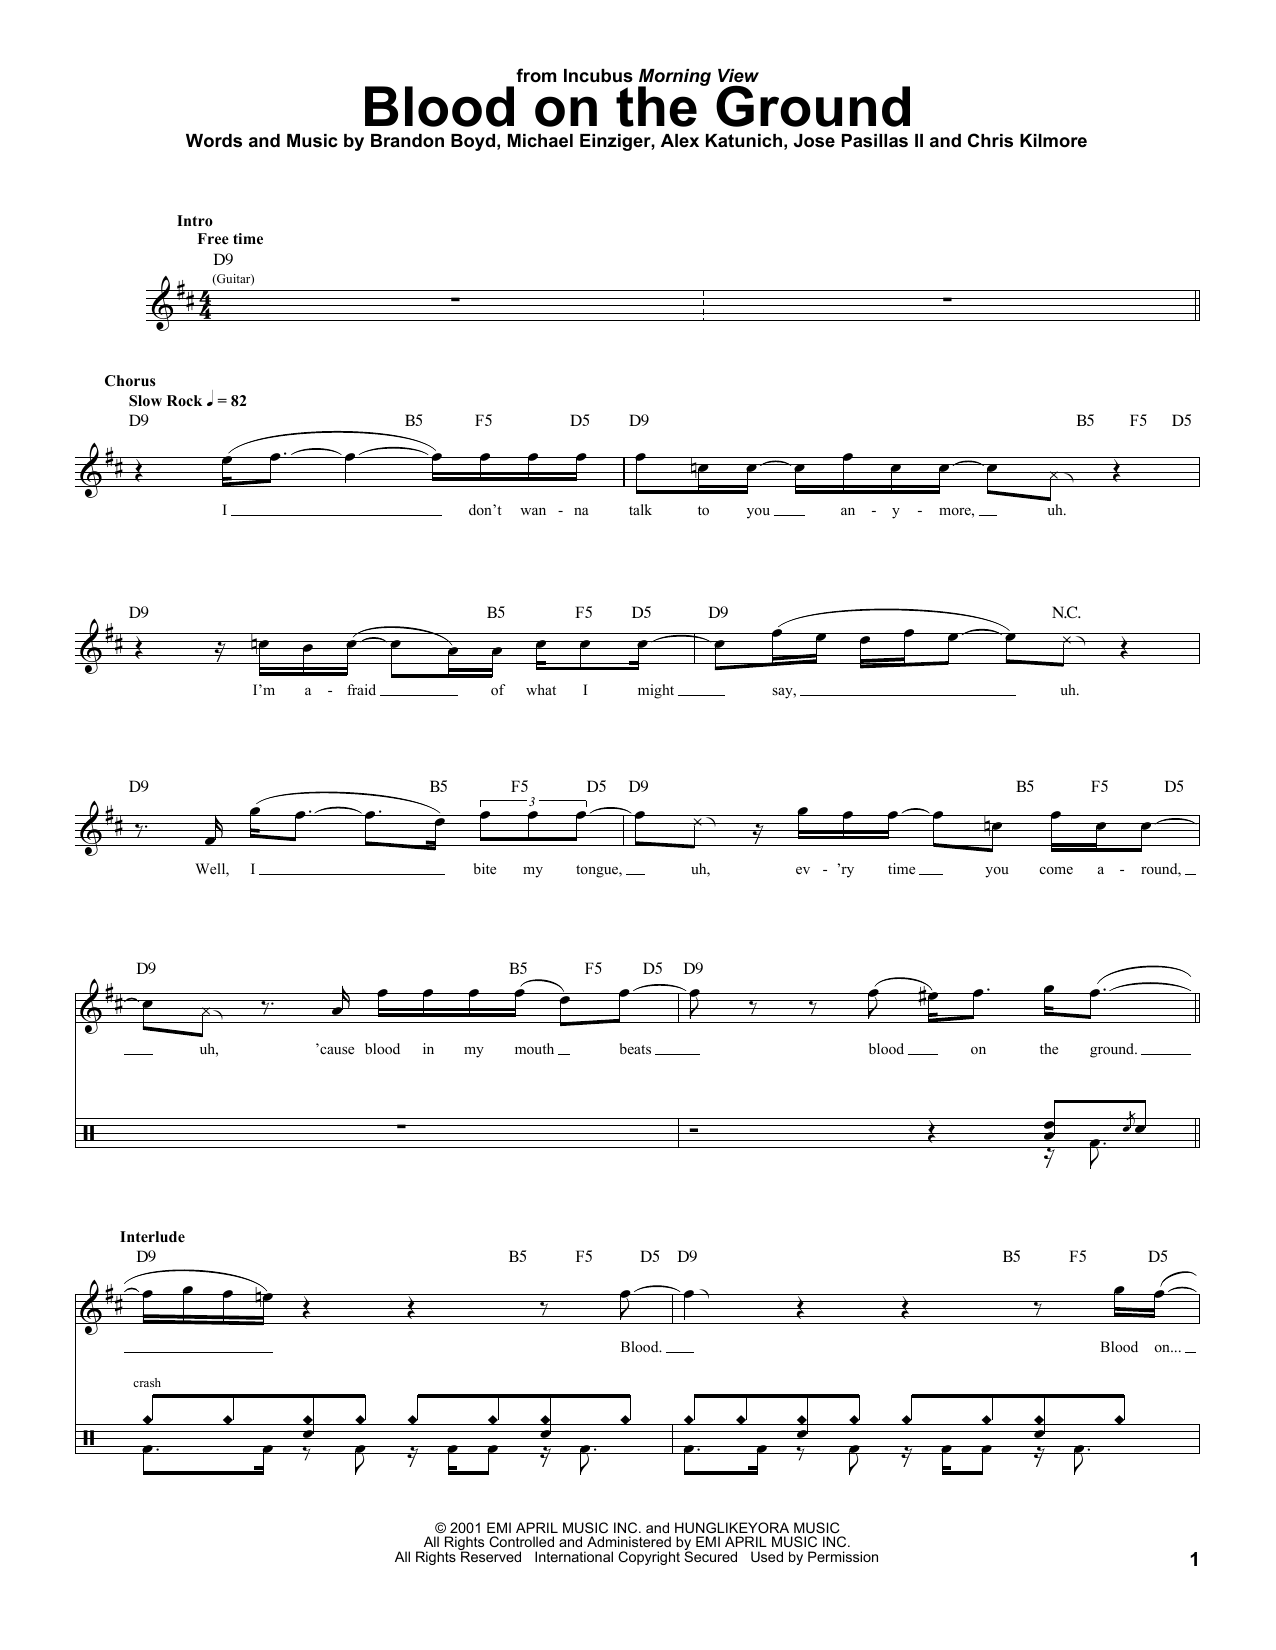 Download Incubus Blood On The Ground Sheet Music